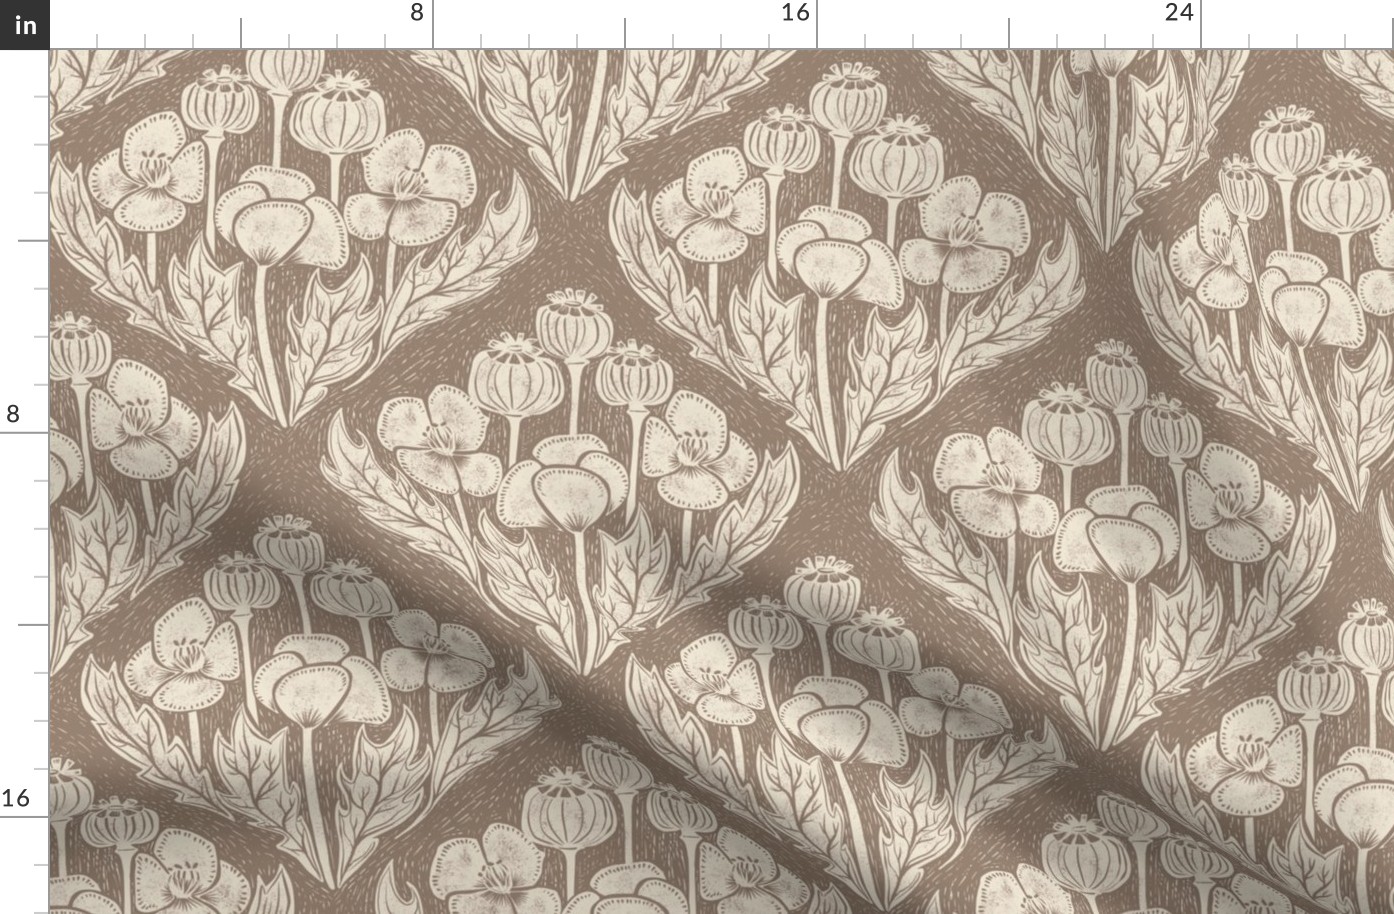 Block print inspired poppy field damask on taupe - medium scale - 10.5" as fabric - 12" as wallpaper